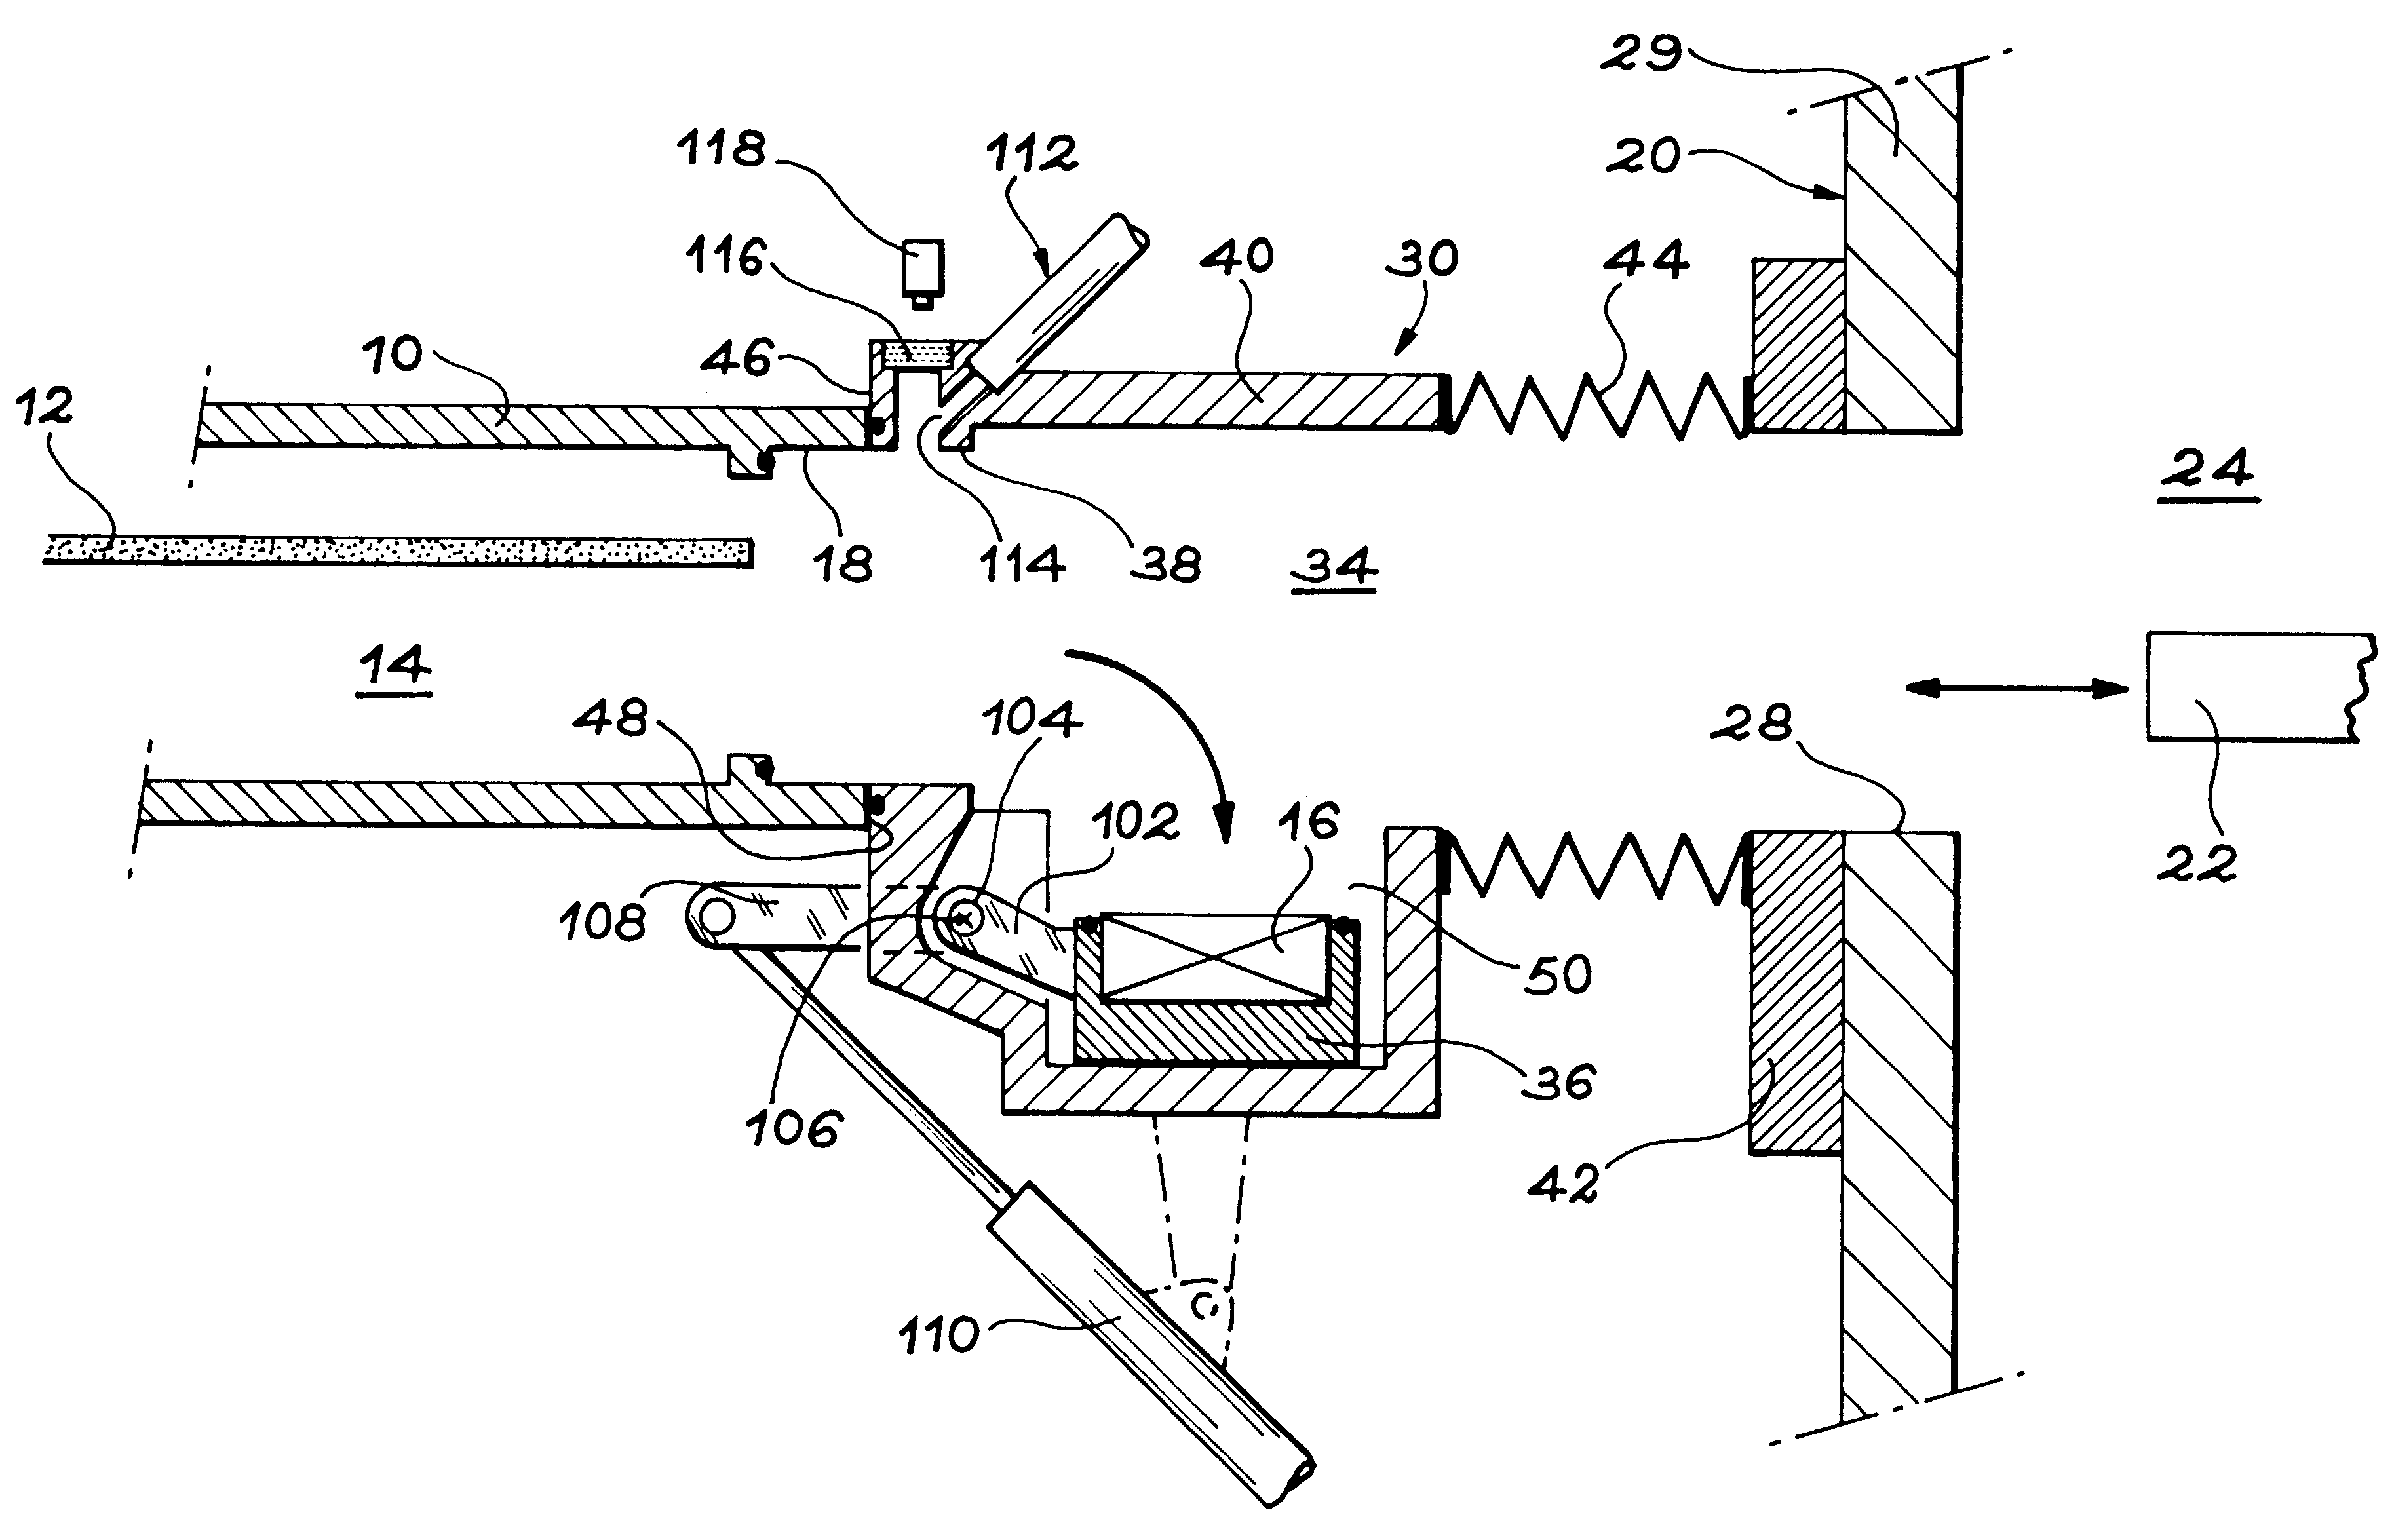 Coupling system for the transfer of a confined planar object from a containment pod to an object processing unit